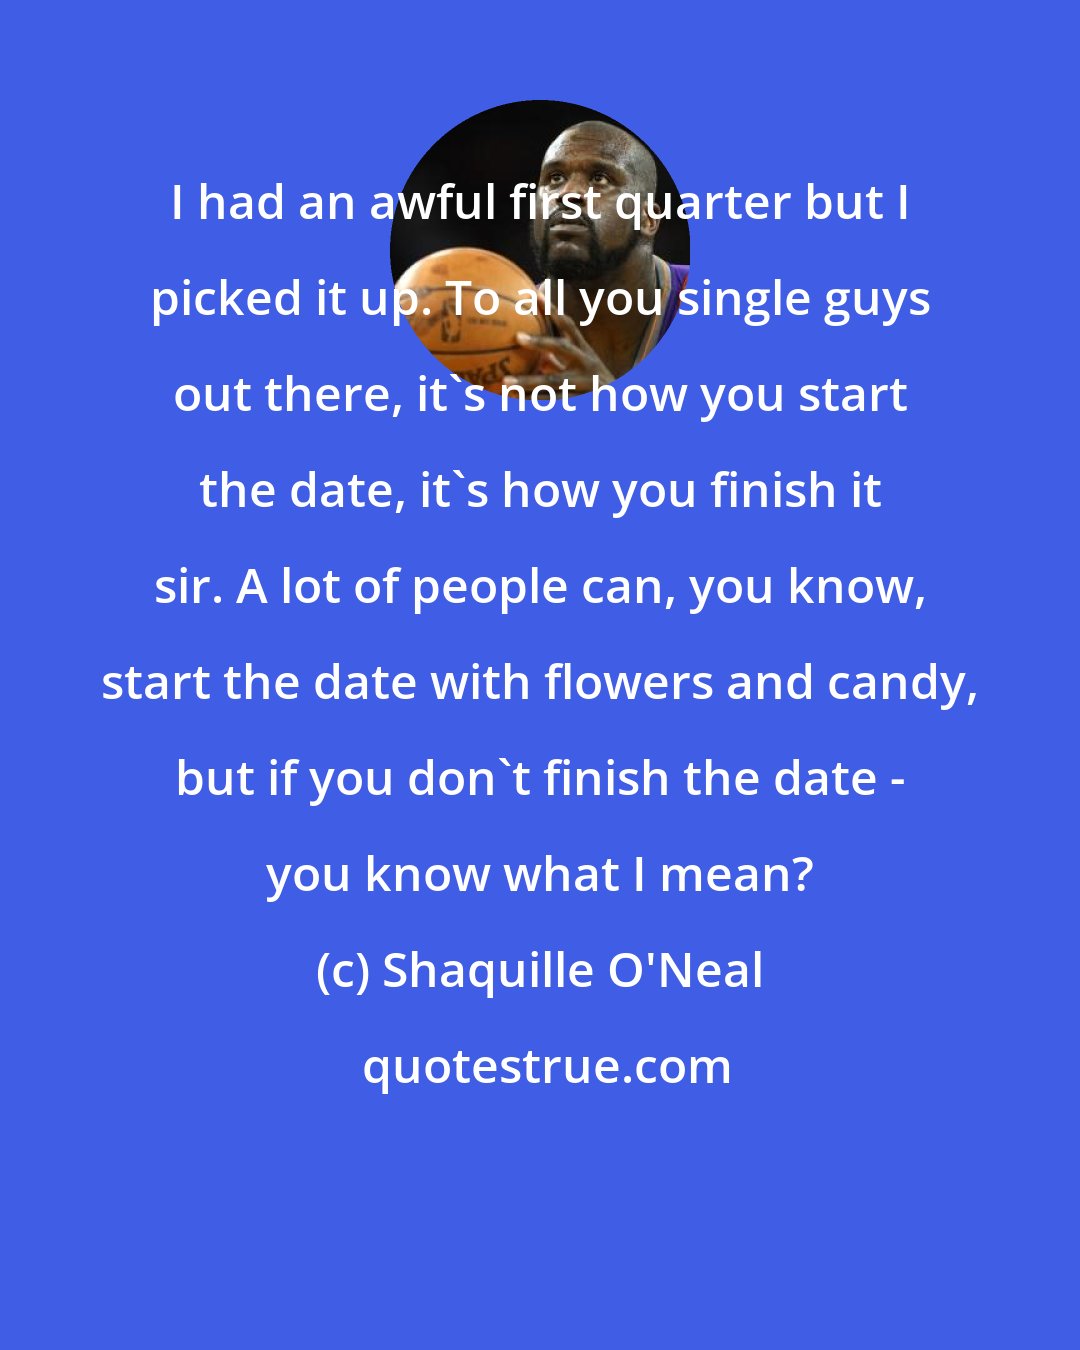 Shaquille O'Neal: I had an awful first quarter but I picked it up. To all you single guys out there, it's not how you start the date, it's how you finish it sir. A lot of people can, you know, start the date with flowers and candy, but if you don't finish the date - you know what I mean?